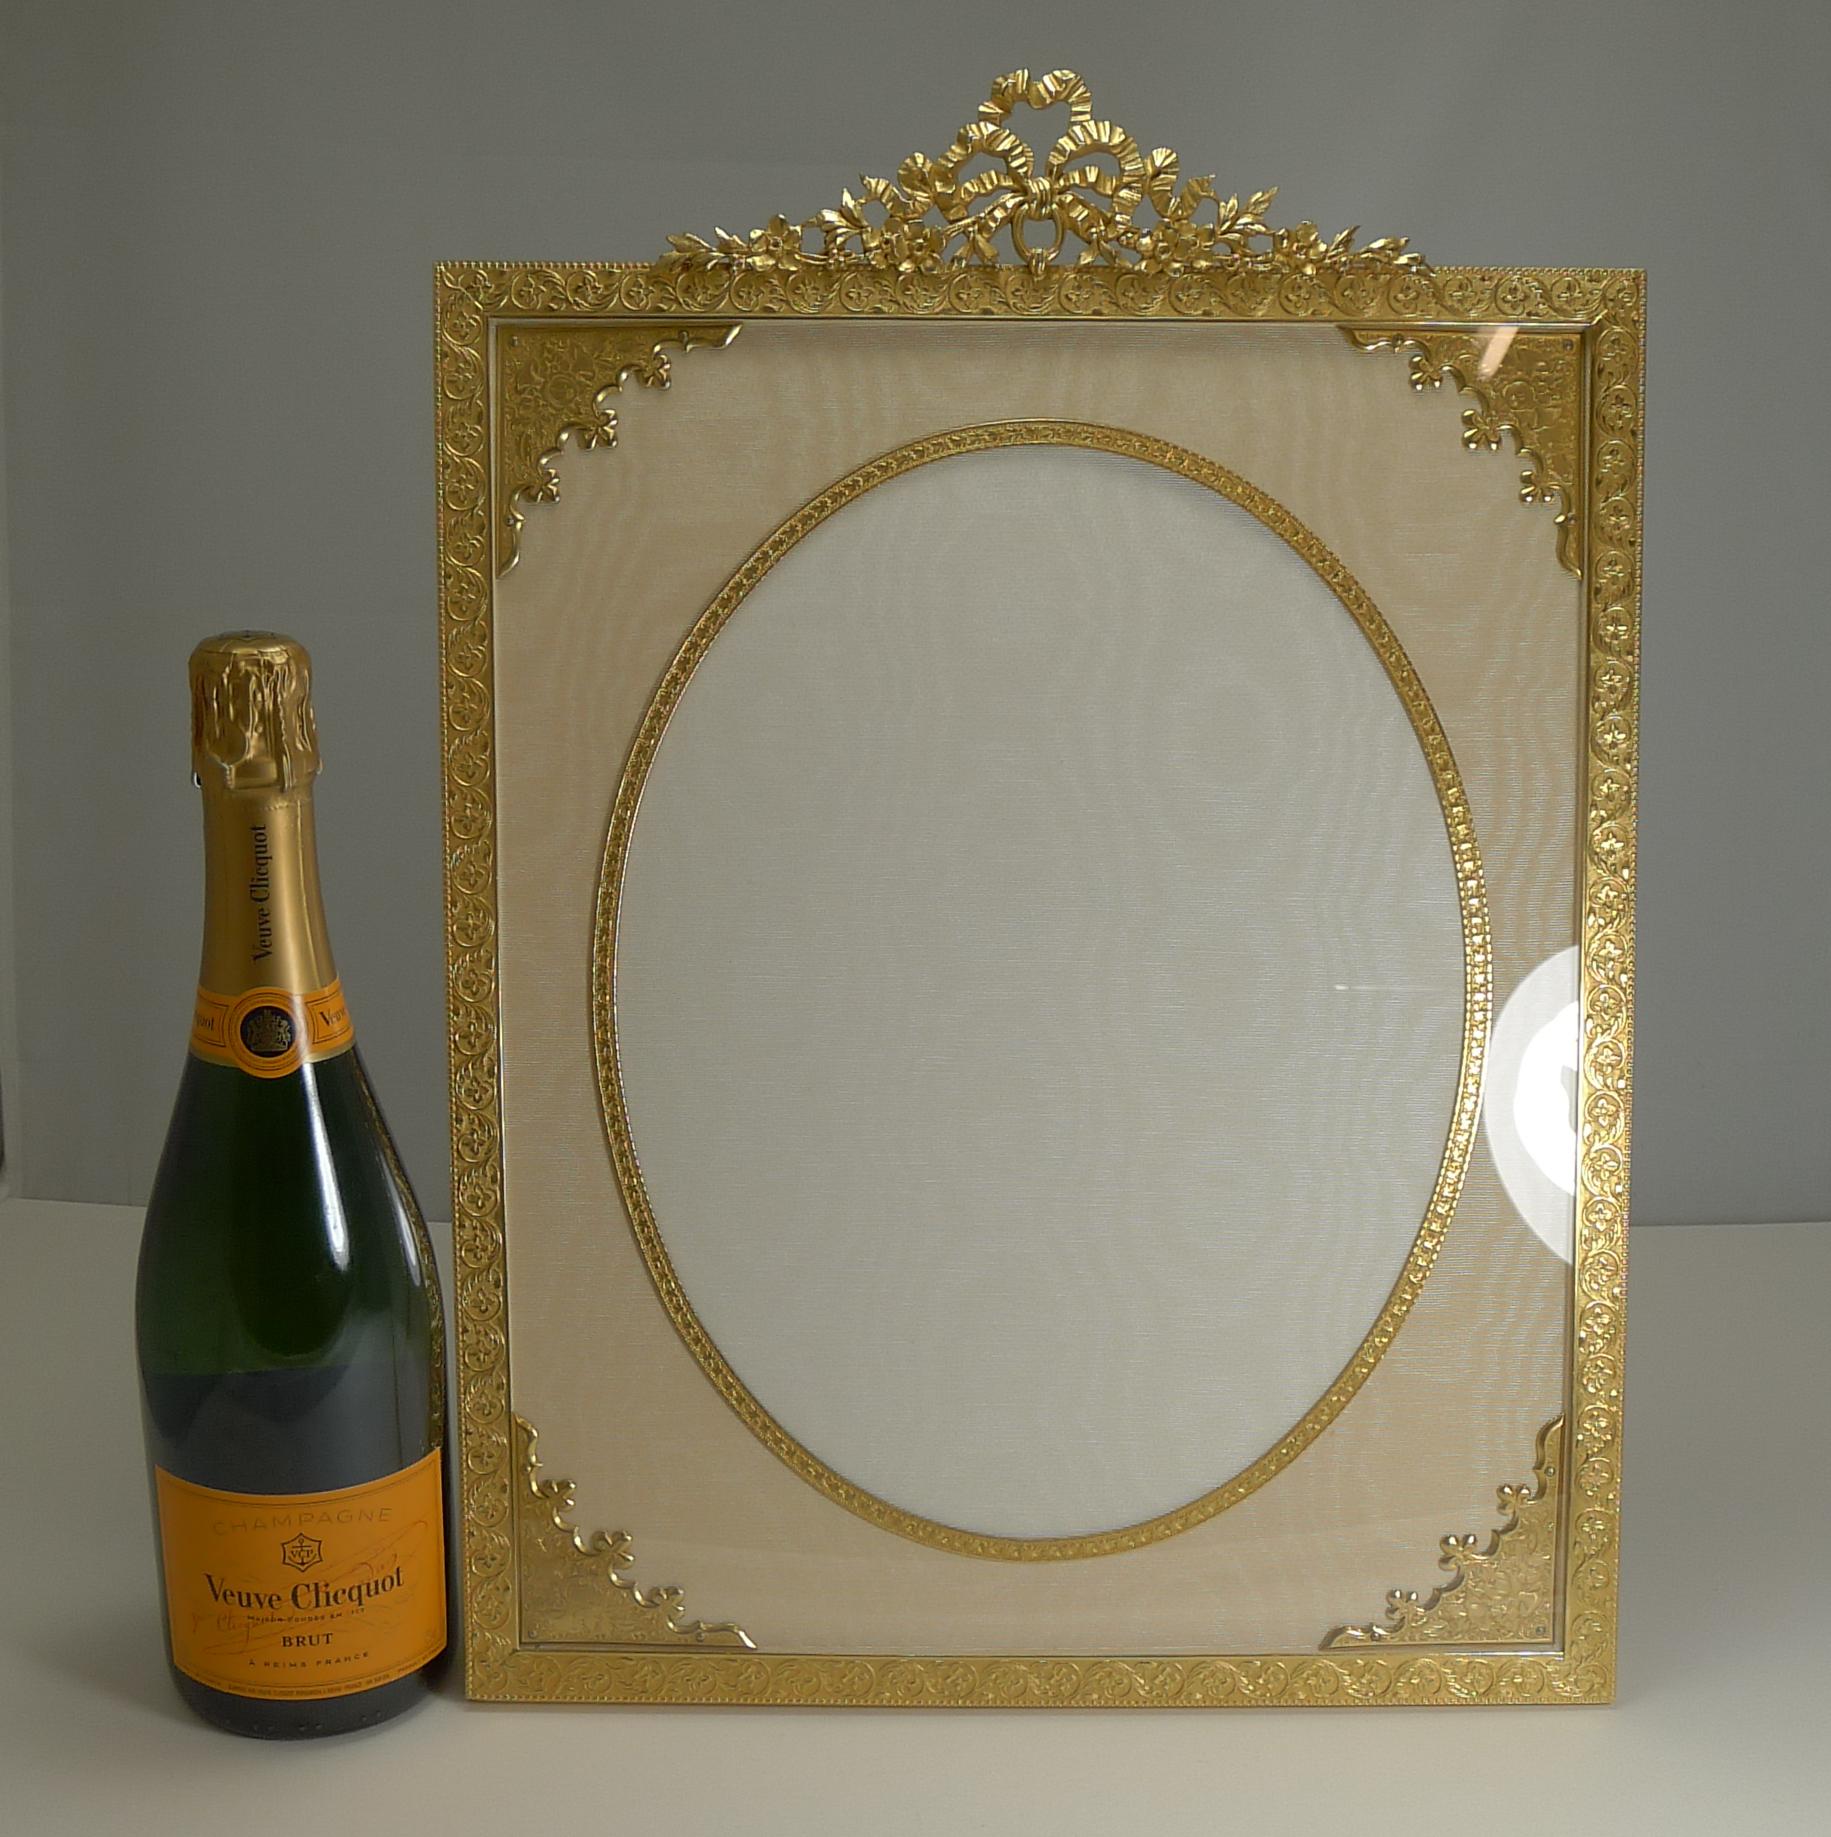 A magnificent and very grand photograph frame; if you are looking for a statement piece, this may very well be it.

Made from Ormolu or gilded bronze, it has been meticulously restored to it's former glory with a bright patina, clean silk taffeta